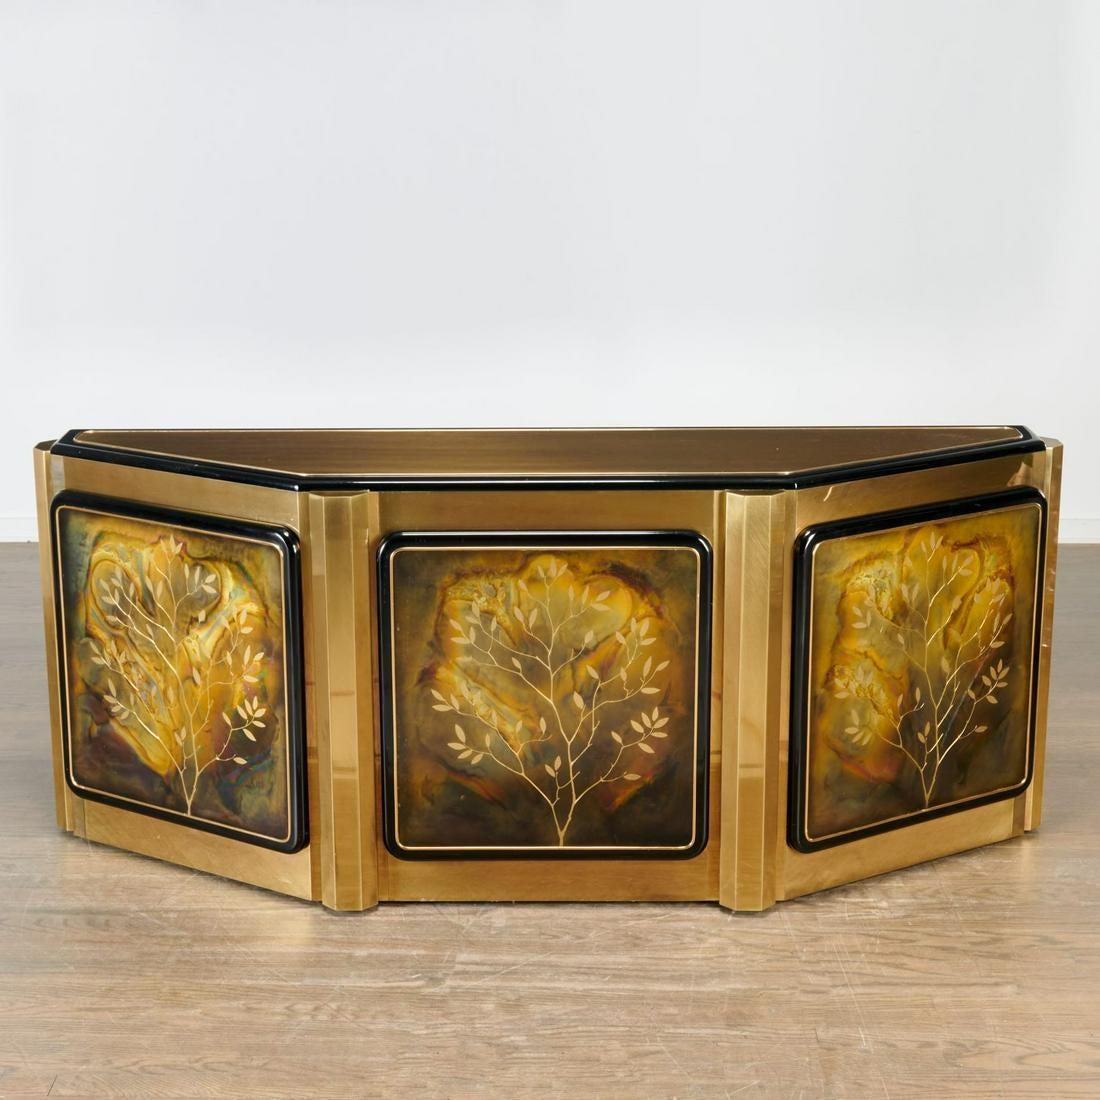 A Mid-Century Modern Mastercraft Tree of Life Console or sideboard by Bernhard Rhone for Mastercraft, sideboard, 1970s, American, the triangular polished brass-clad cabinet with acid etched and patinated bronze and black lacquer doors. This is one